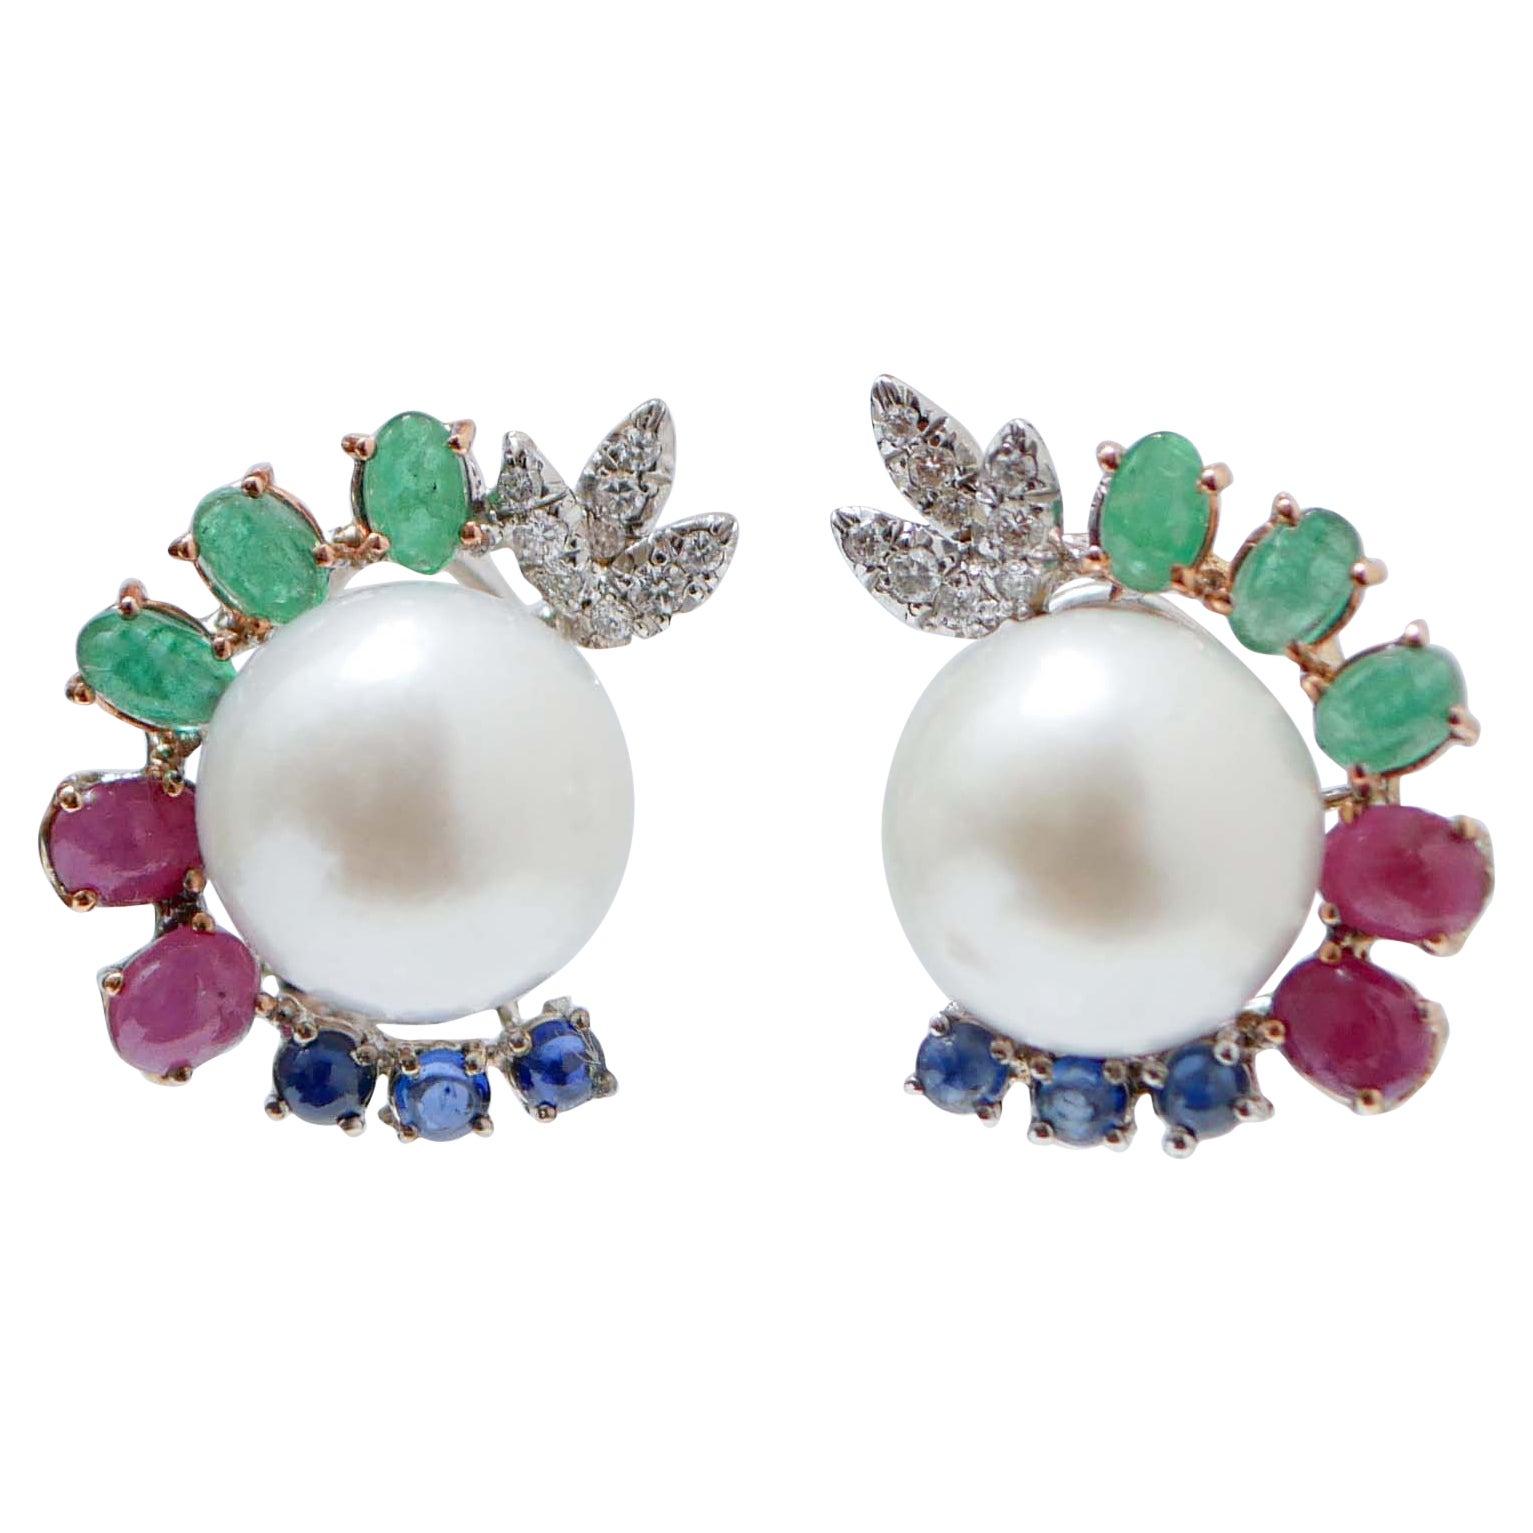 South-Sea Pearls, Emeralds, Rubies, Sapphires, Diamonds, 18 Kt Gold Earrings. For Sale